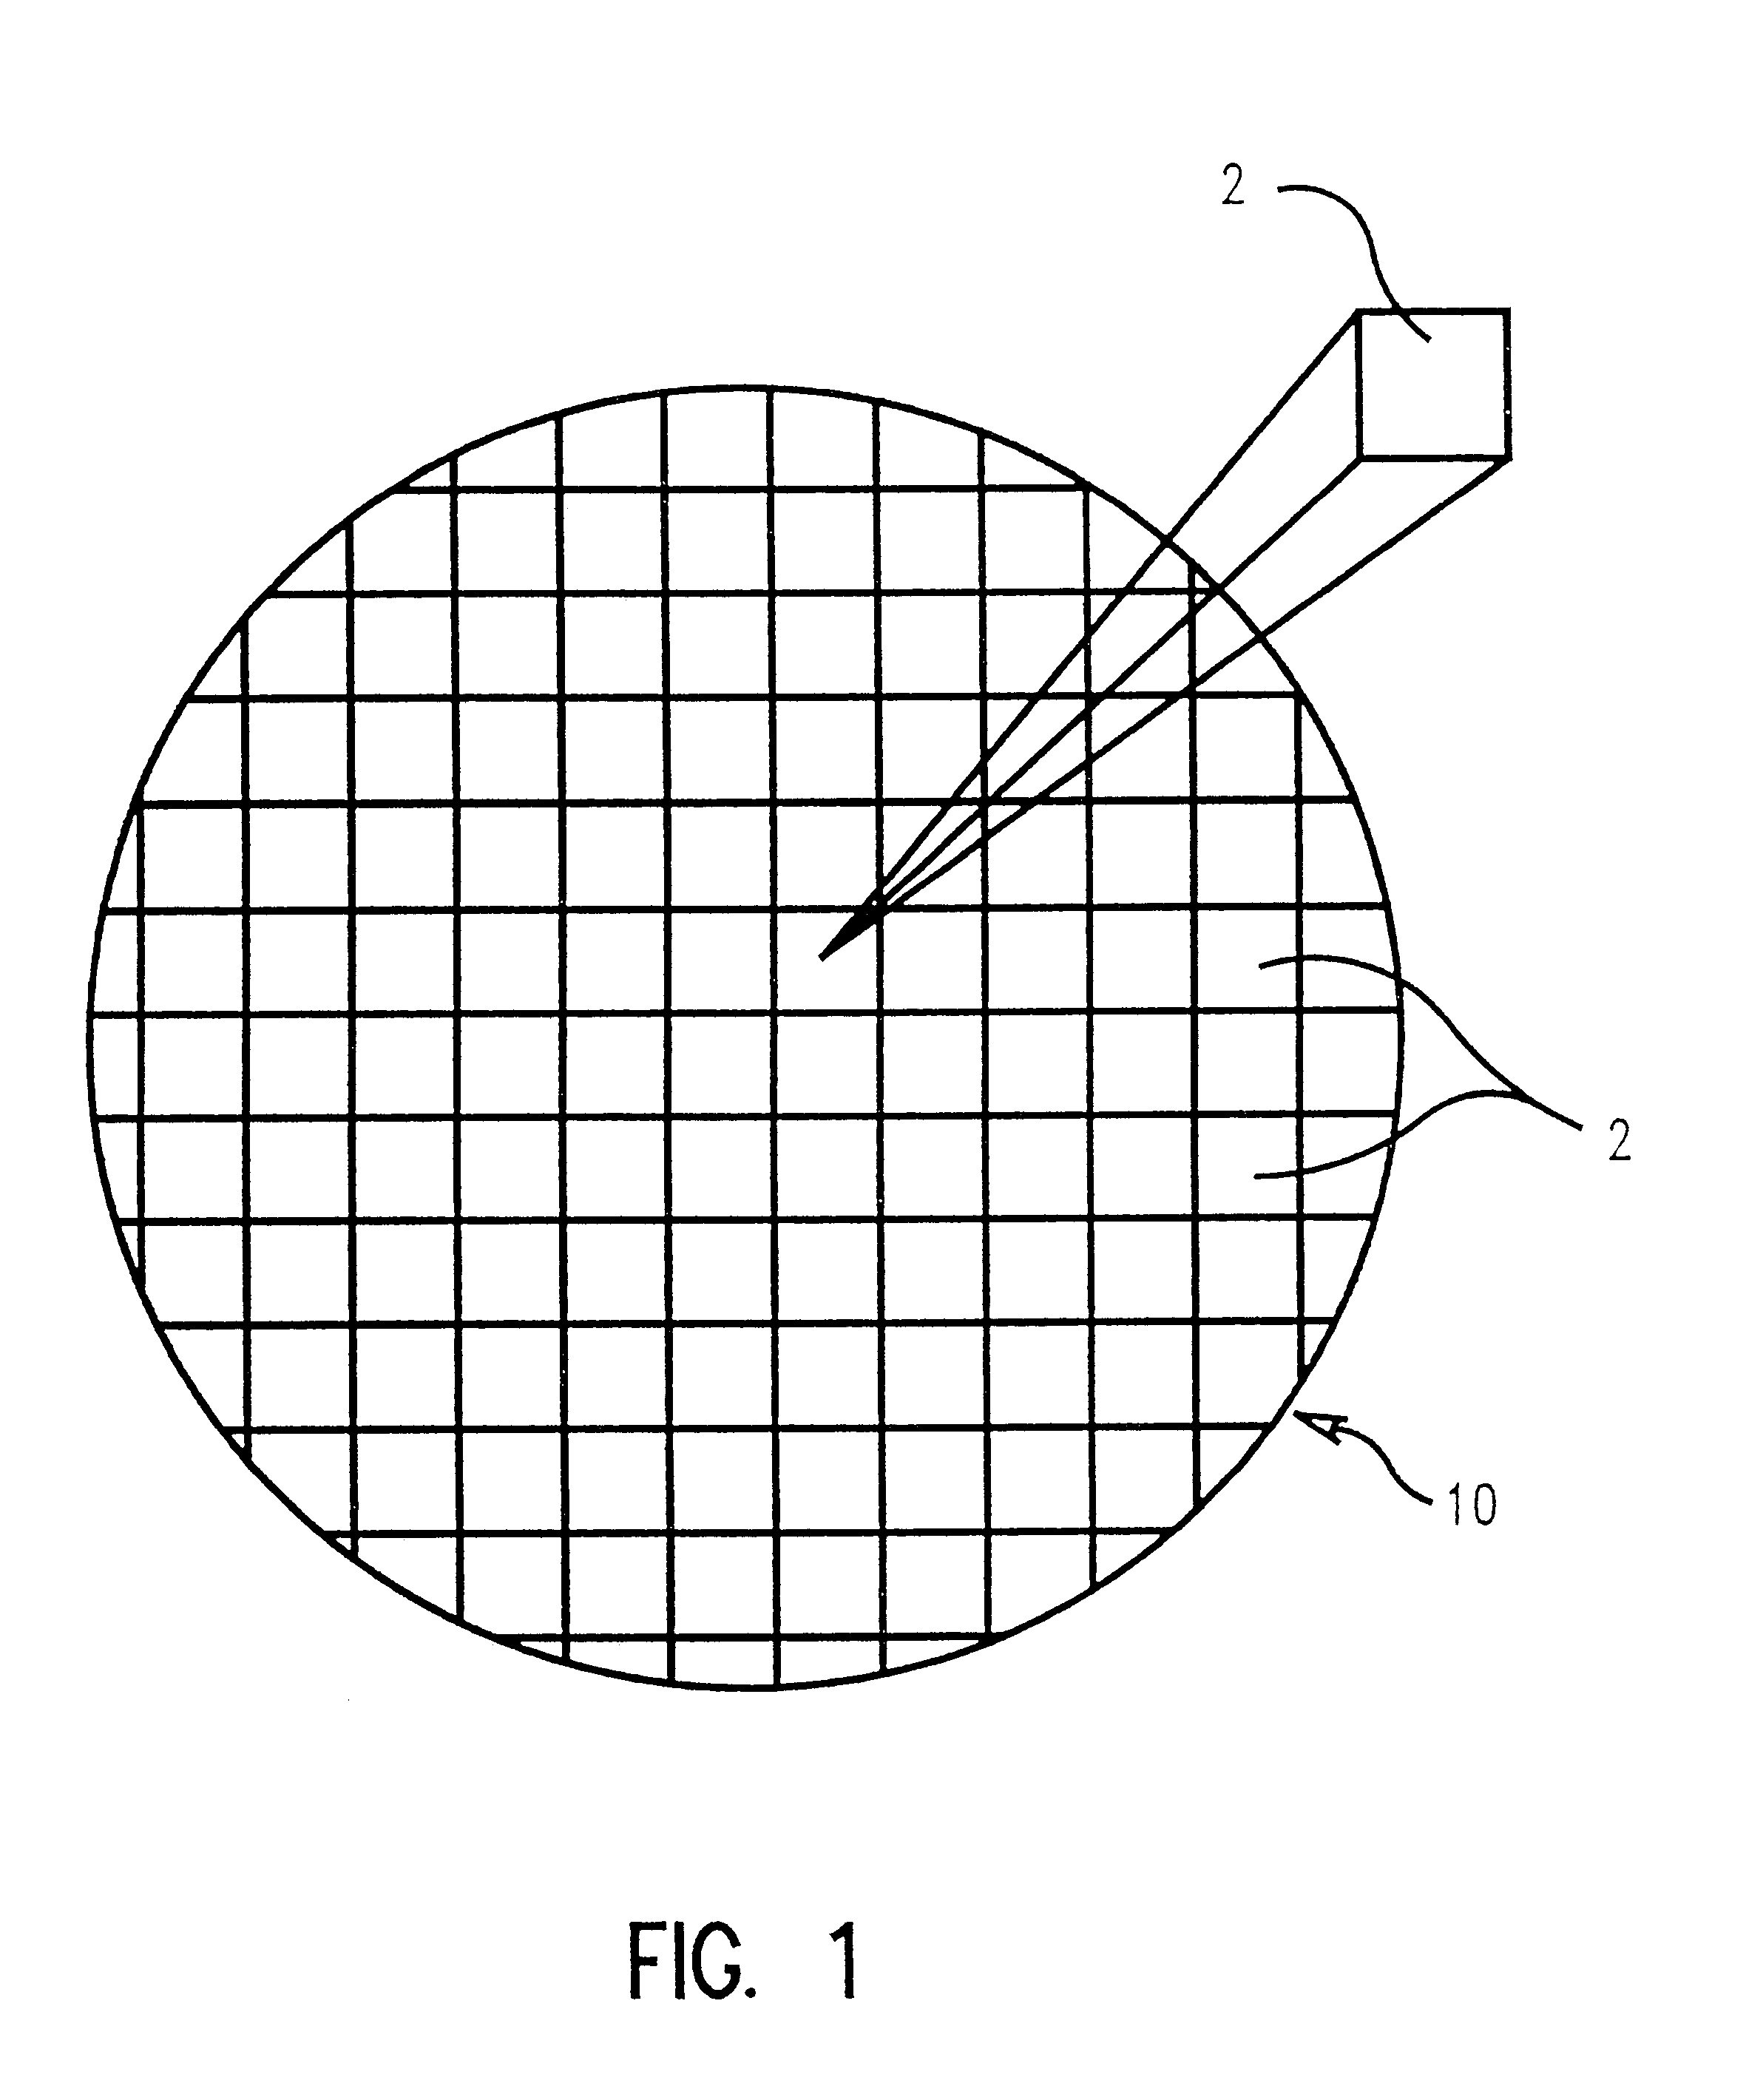 Method for testing semiconductor devices